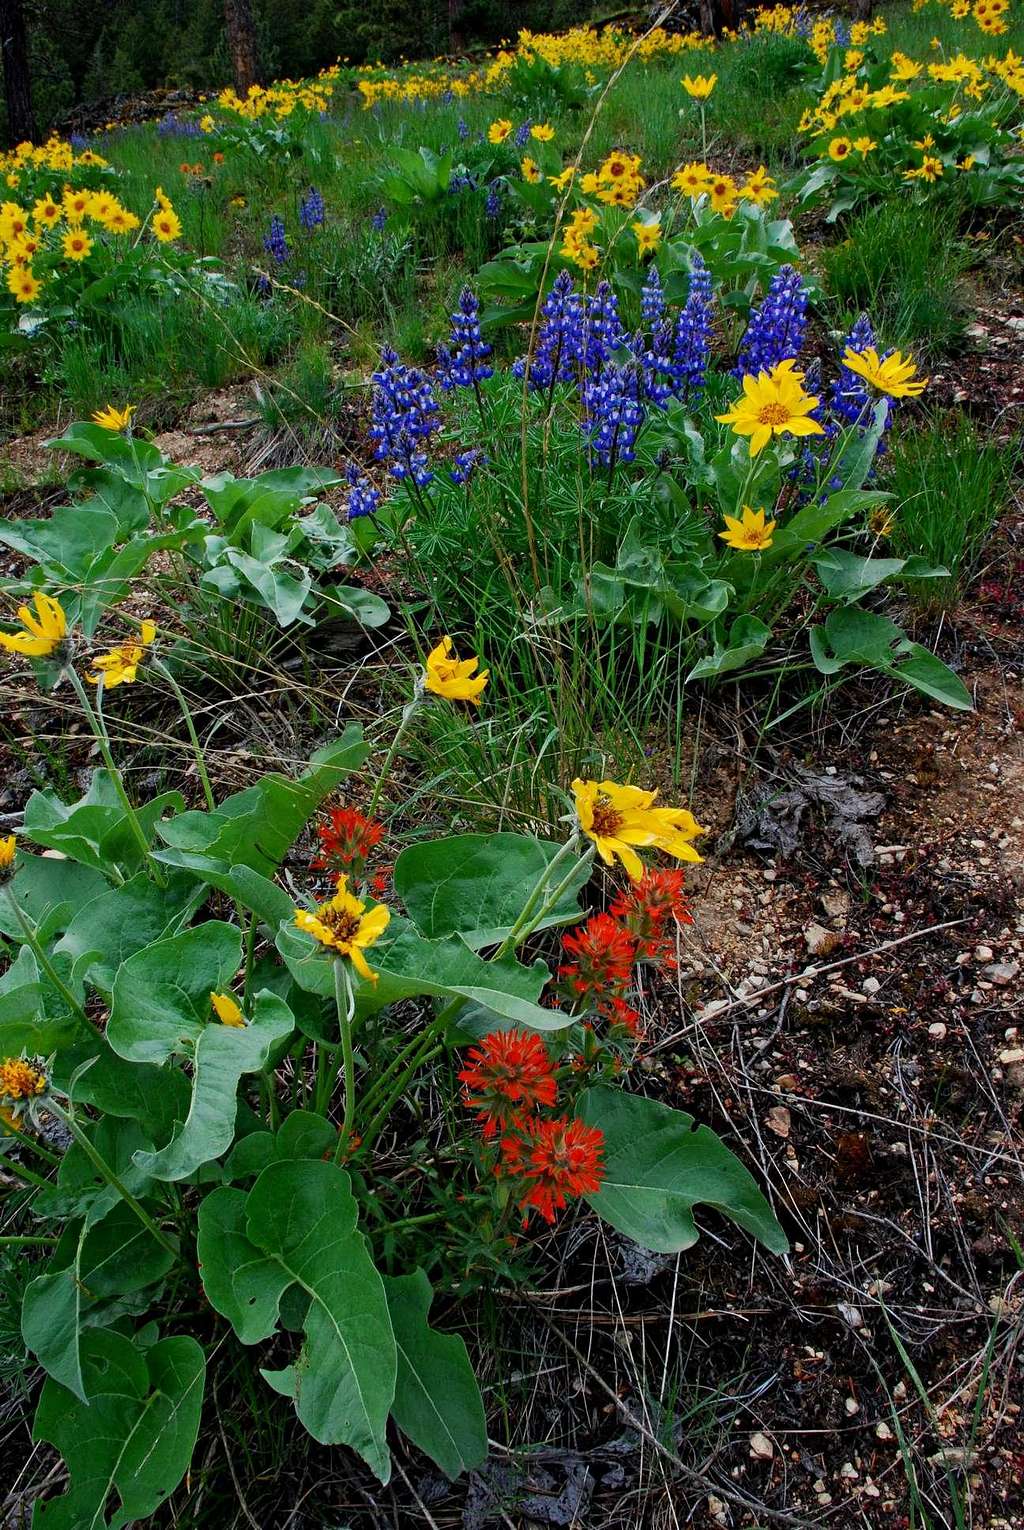 Arrowleaf, Lupin, and Paintbrush